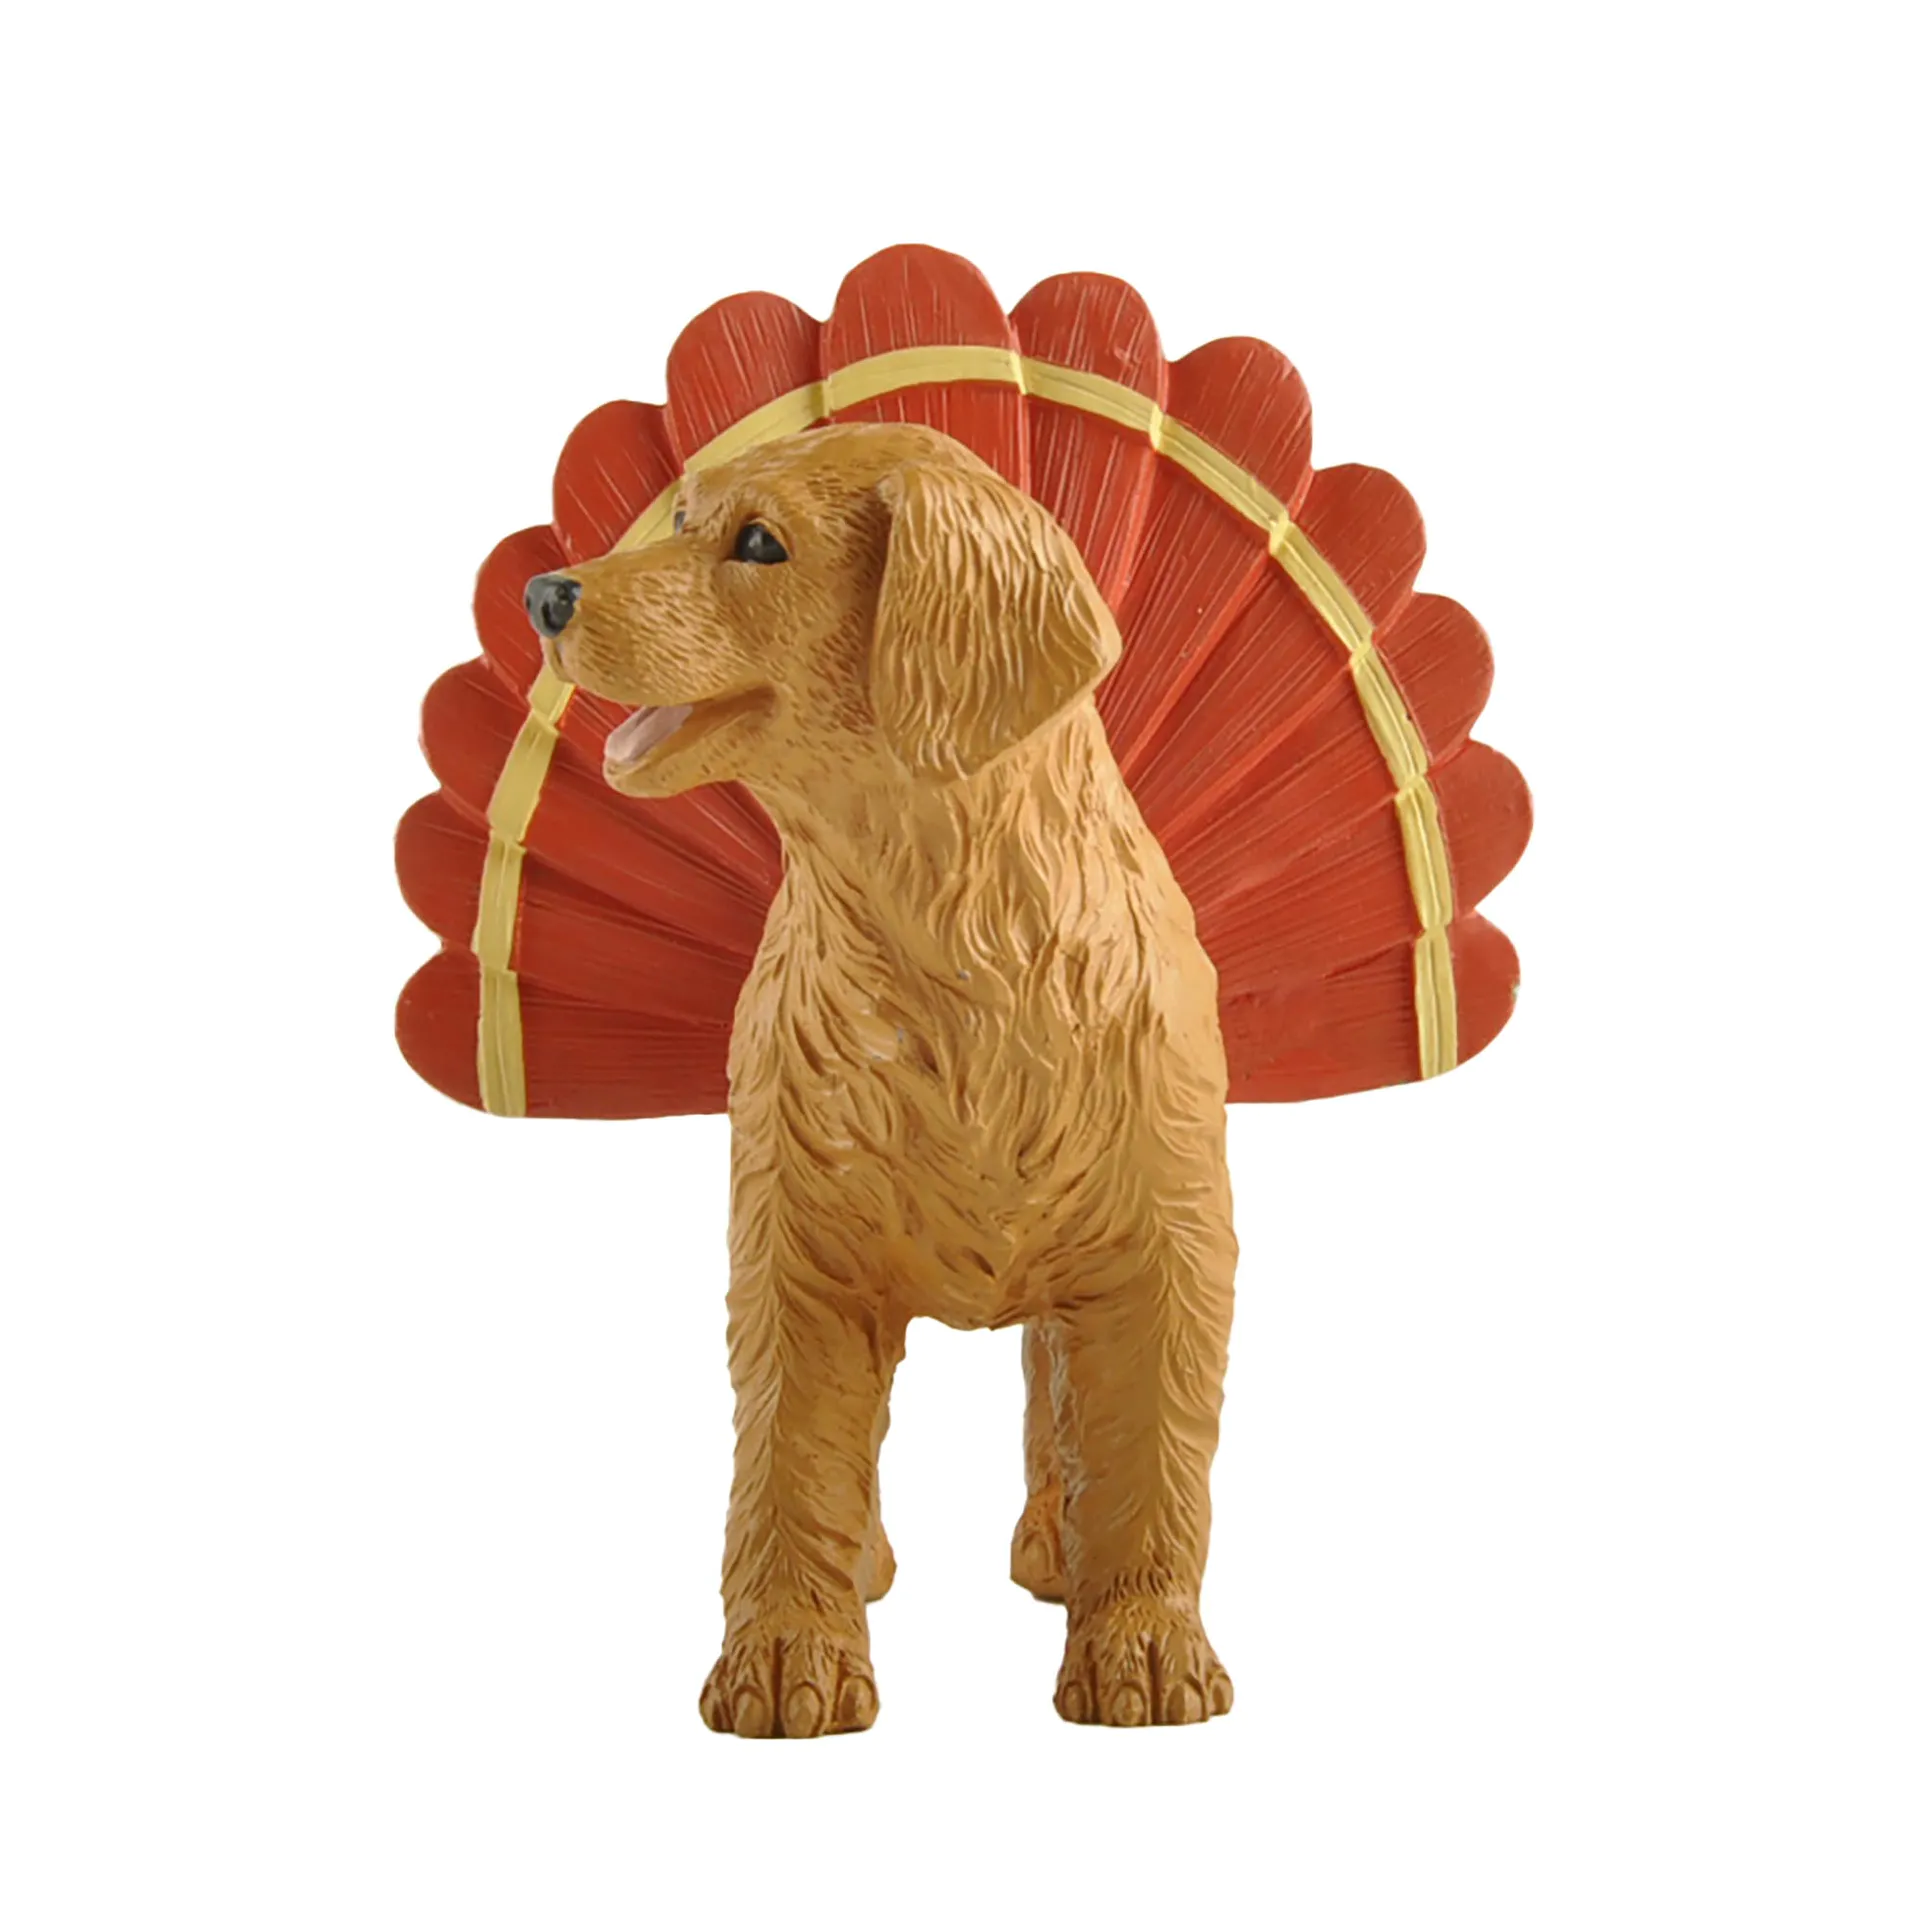 New Design Innovative Thanksgiving Gift Designs Resin Crafts Dog with Turkey Feathers for Desktop Decoration236-13842